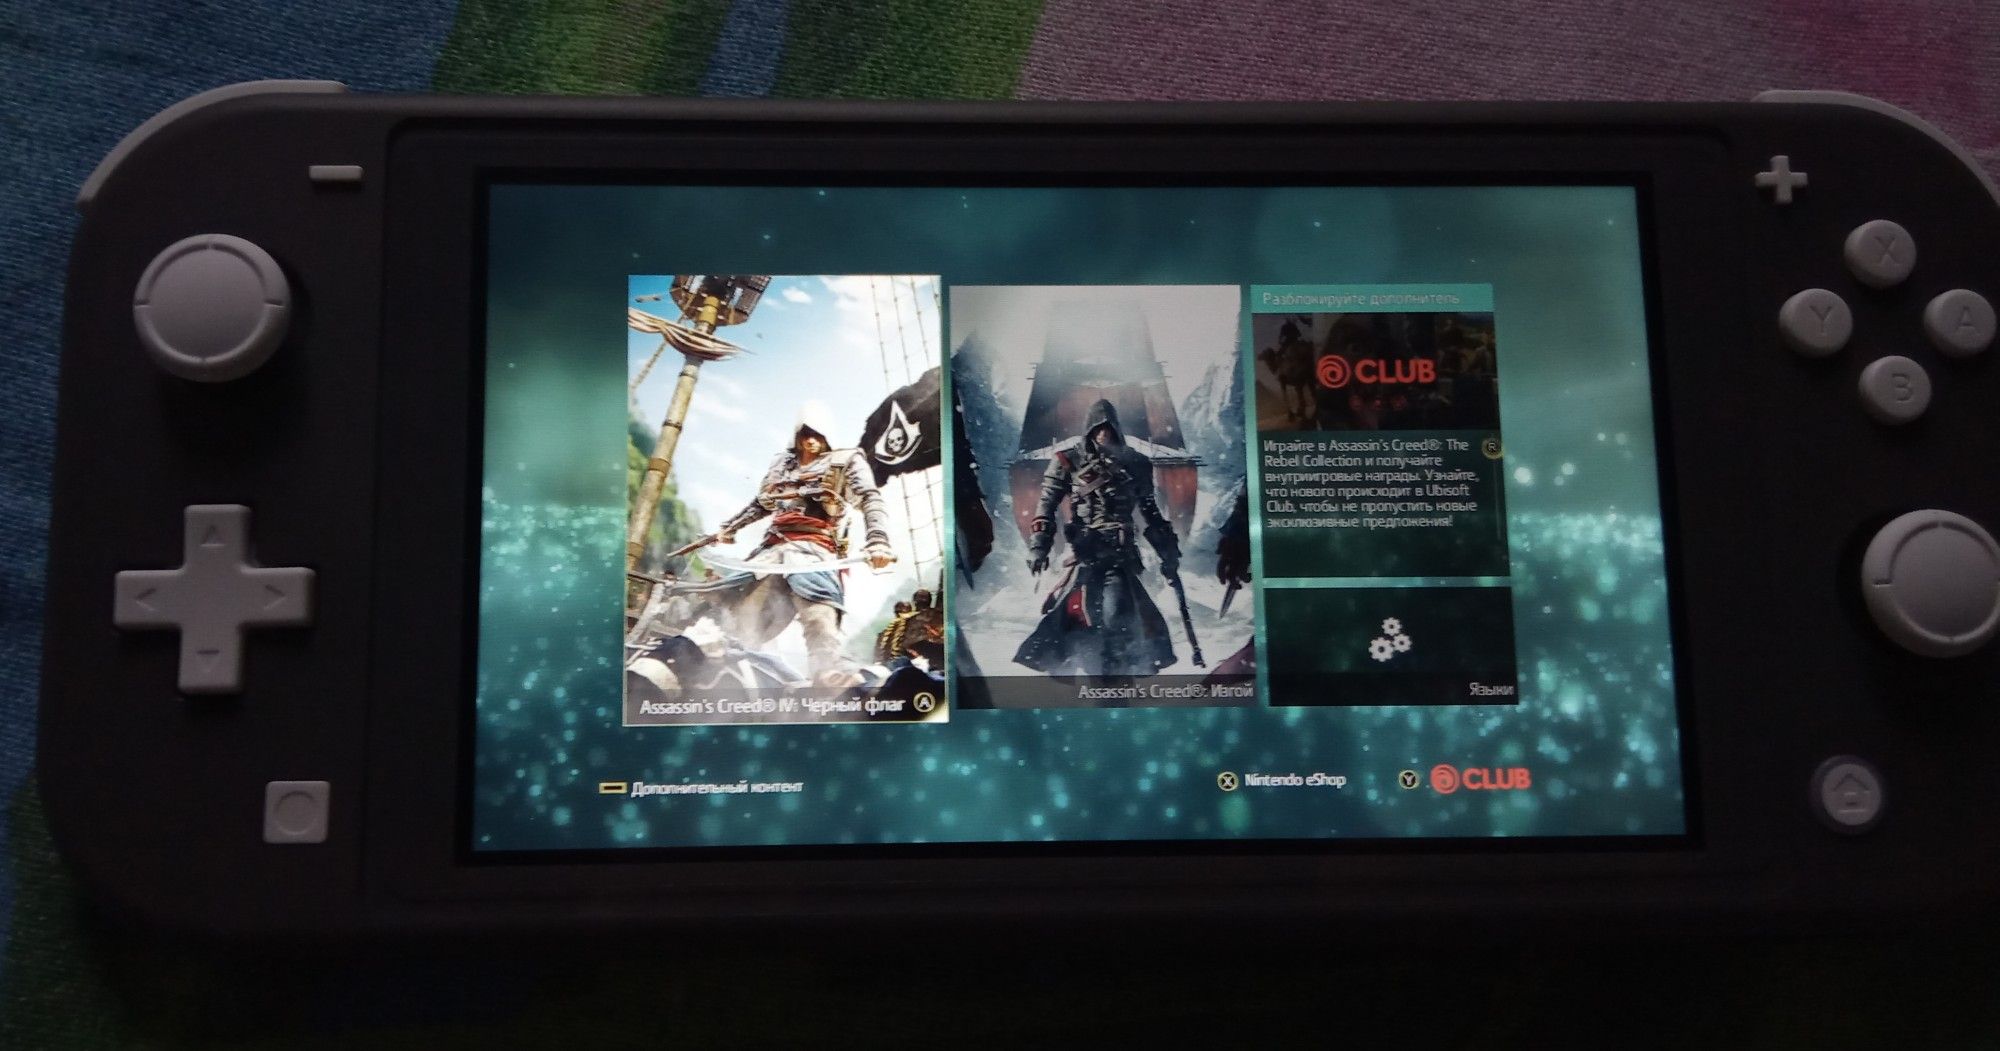 Nintendo switch assassin s creed